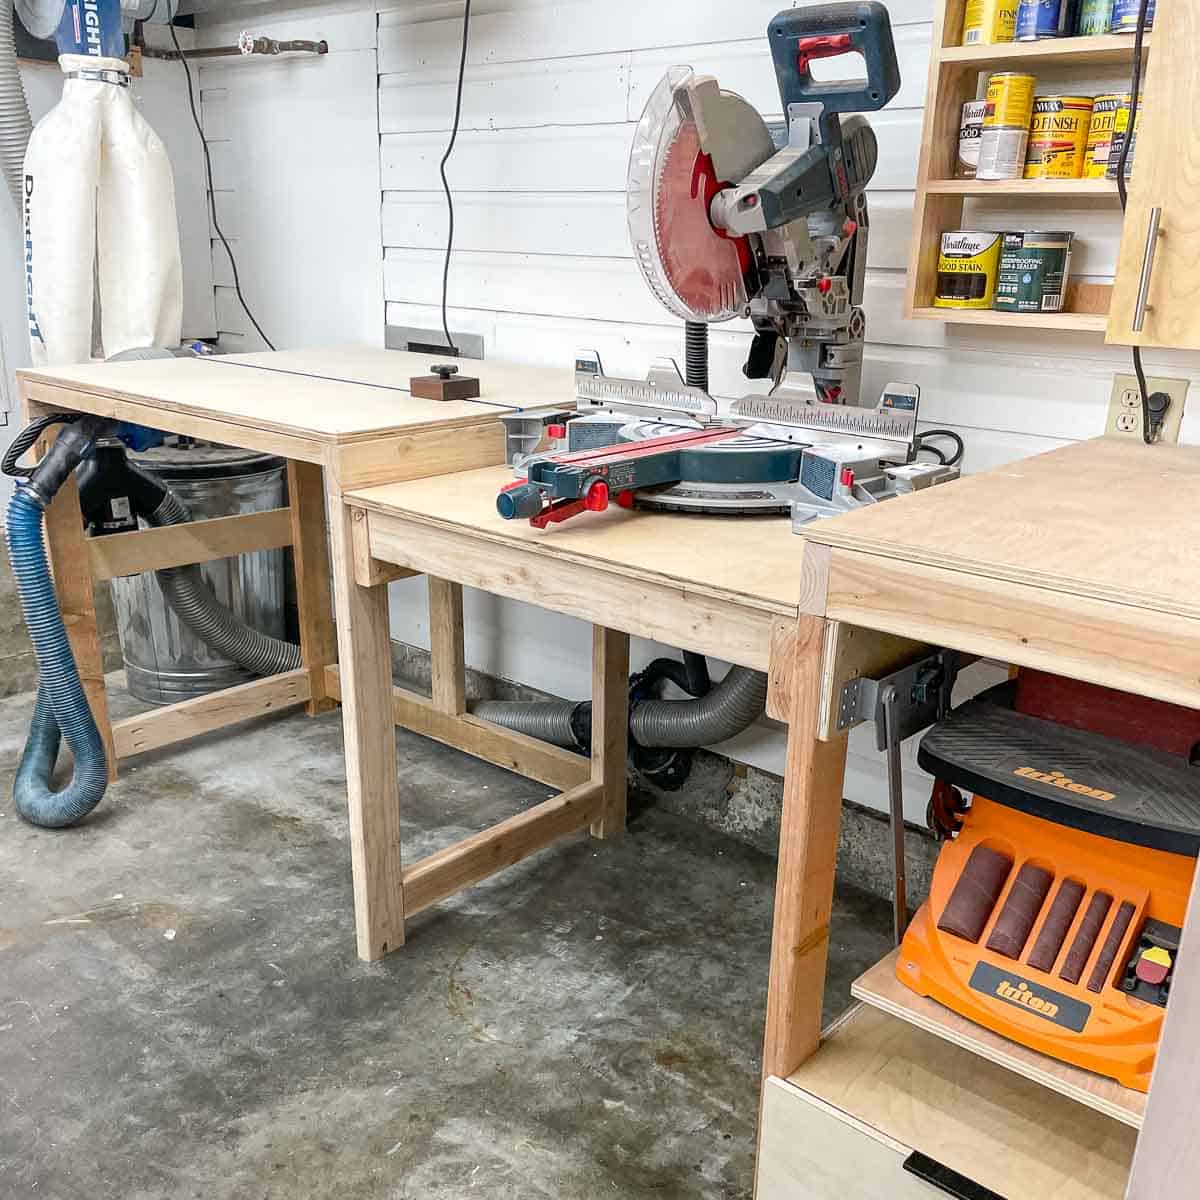 DIY miter saw station with plans